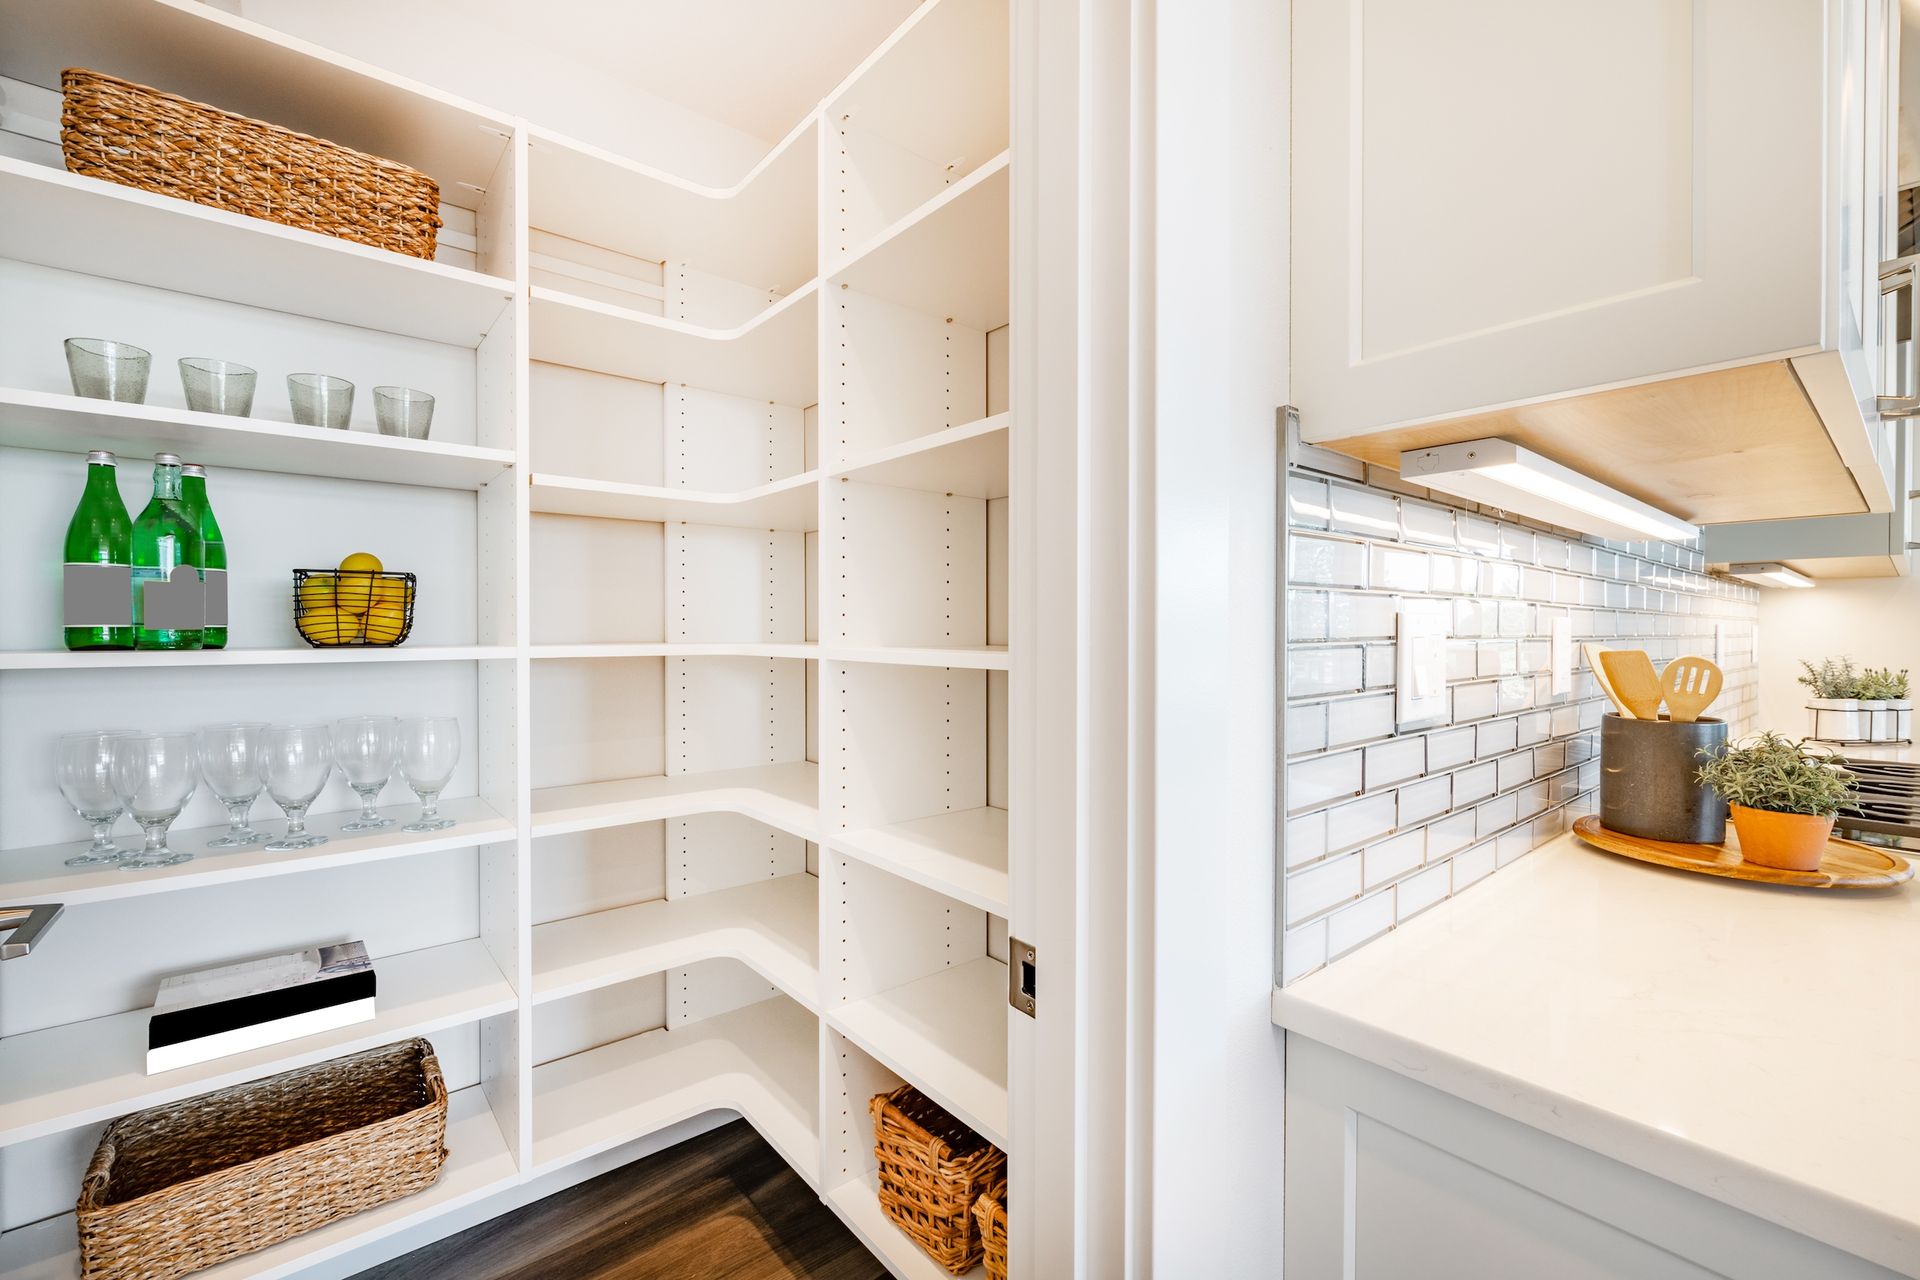 blog-post-header-imageFather’s Day Special: 7 Creative Storage Solutions for Small Spaces